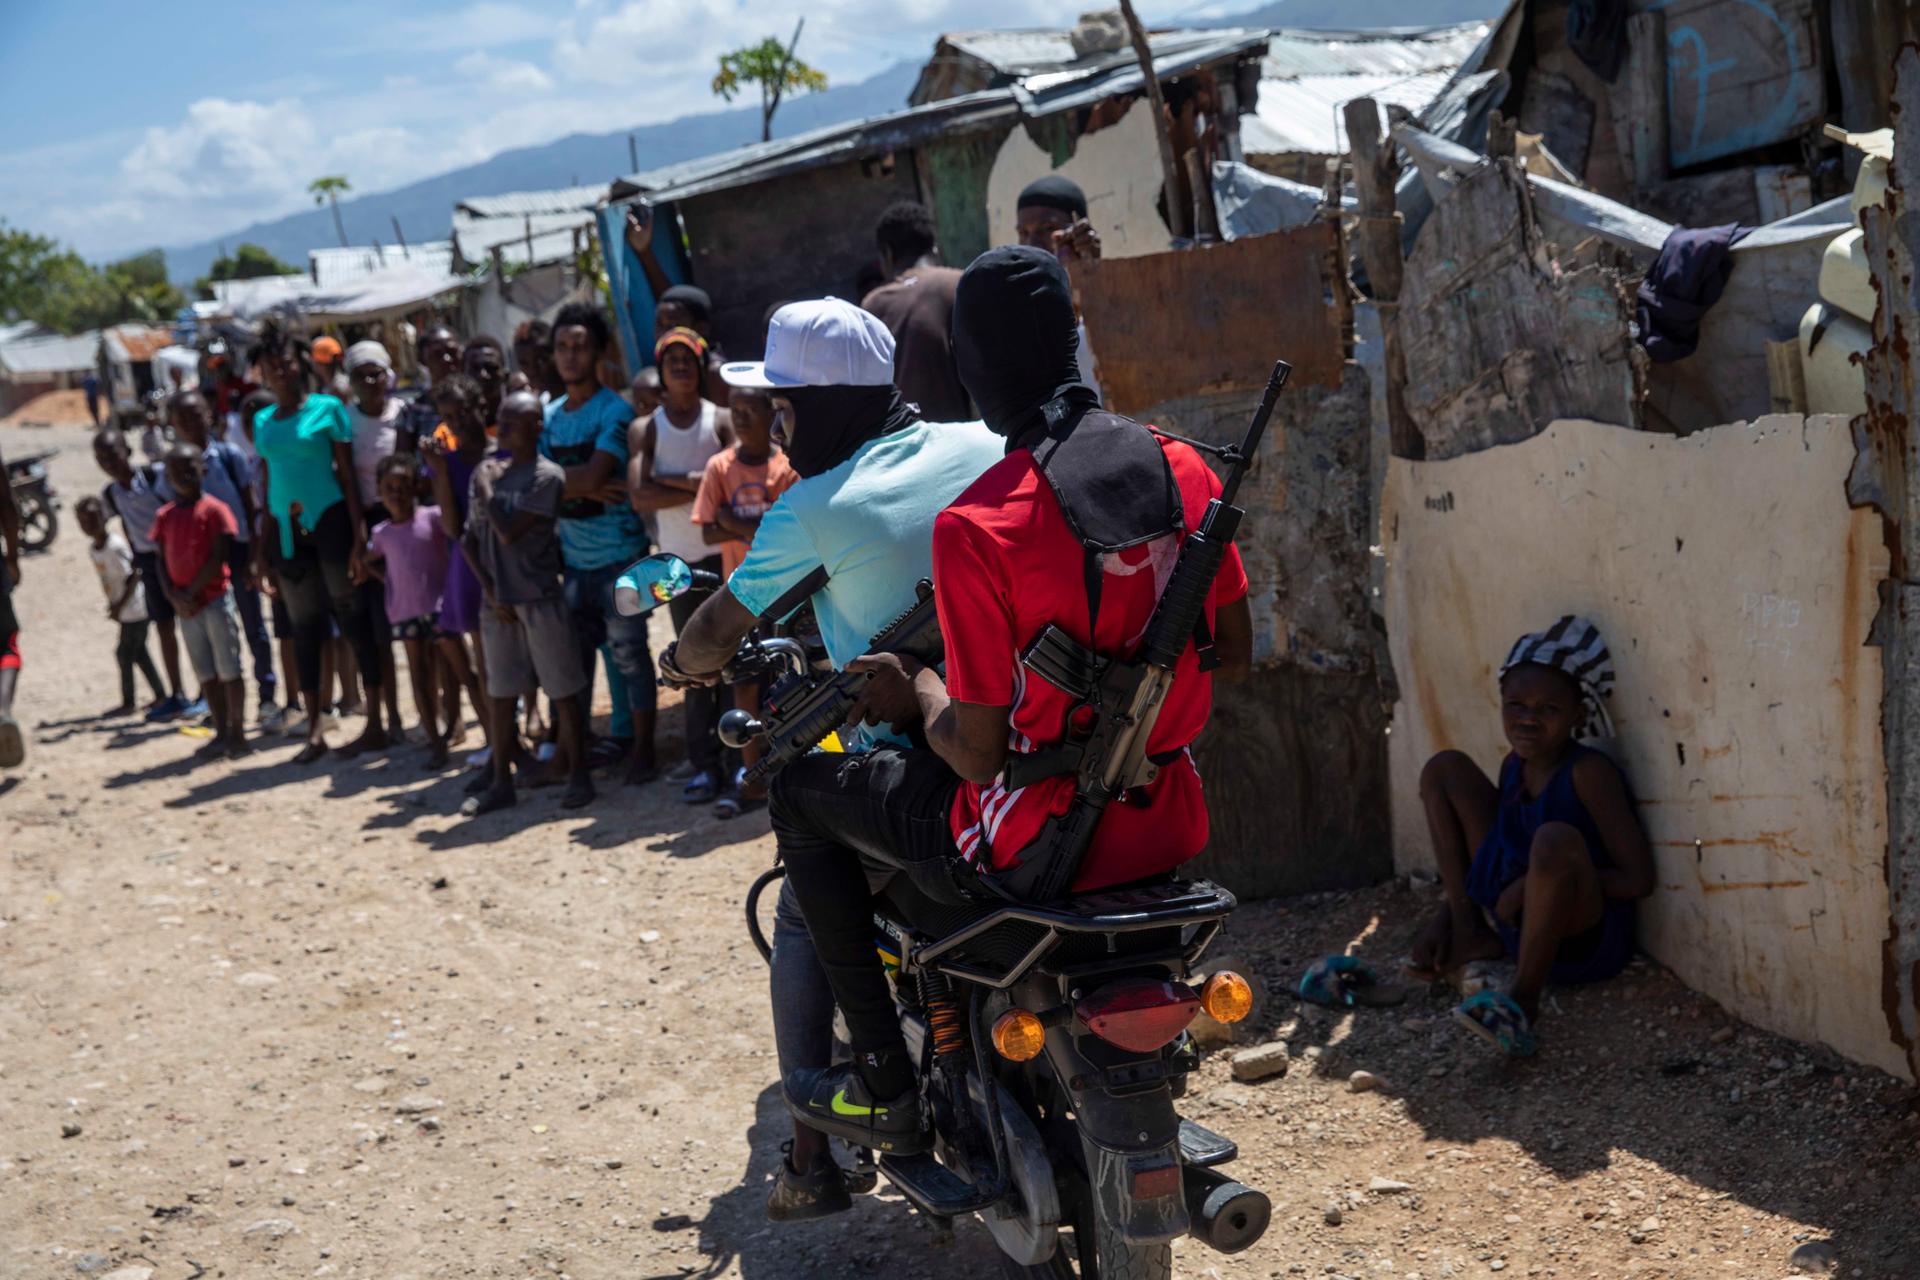 G9 coalition gang members ride a motorcycle through the Wharf Jeremy street market in Port-au-Prince, Haiti, on Oct. 6, 2021.